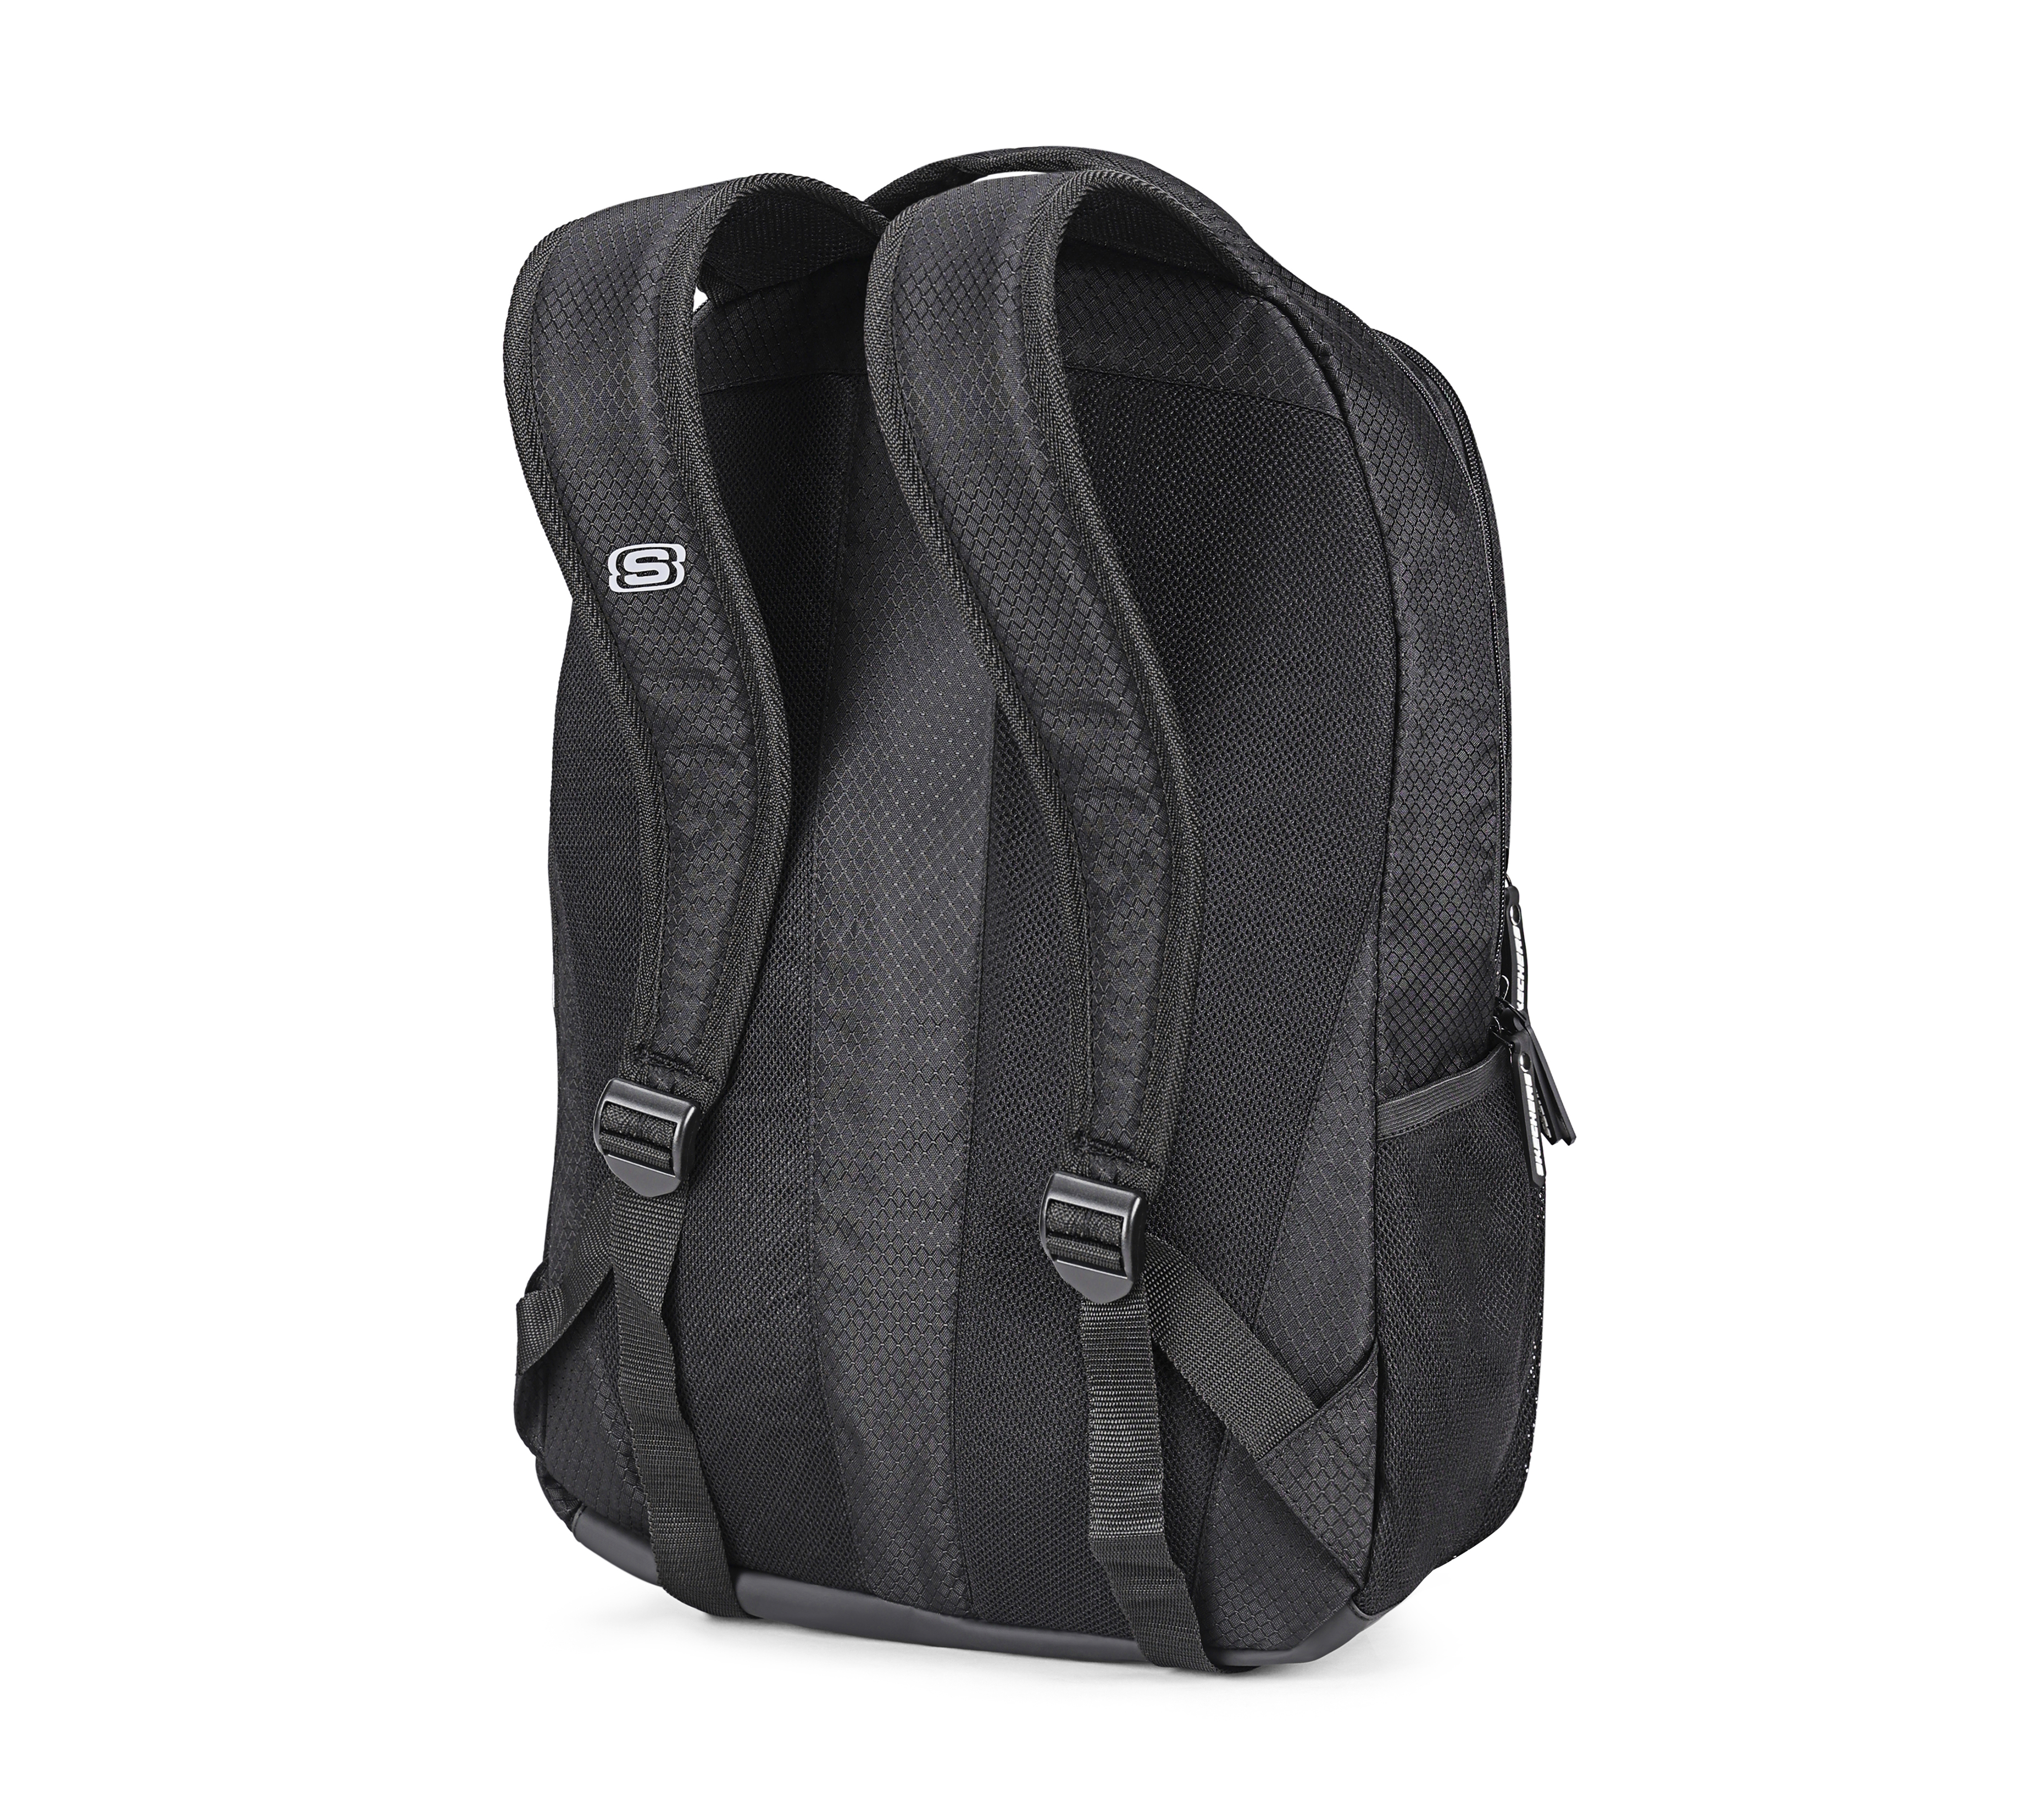 BAGPACK WITH THREE COMPARTMEN, DARK GREY Accessories Bottom View